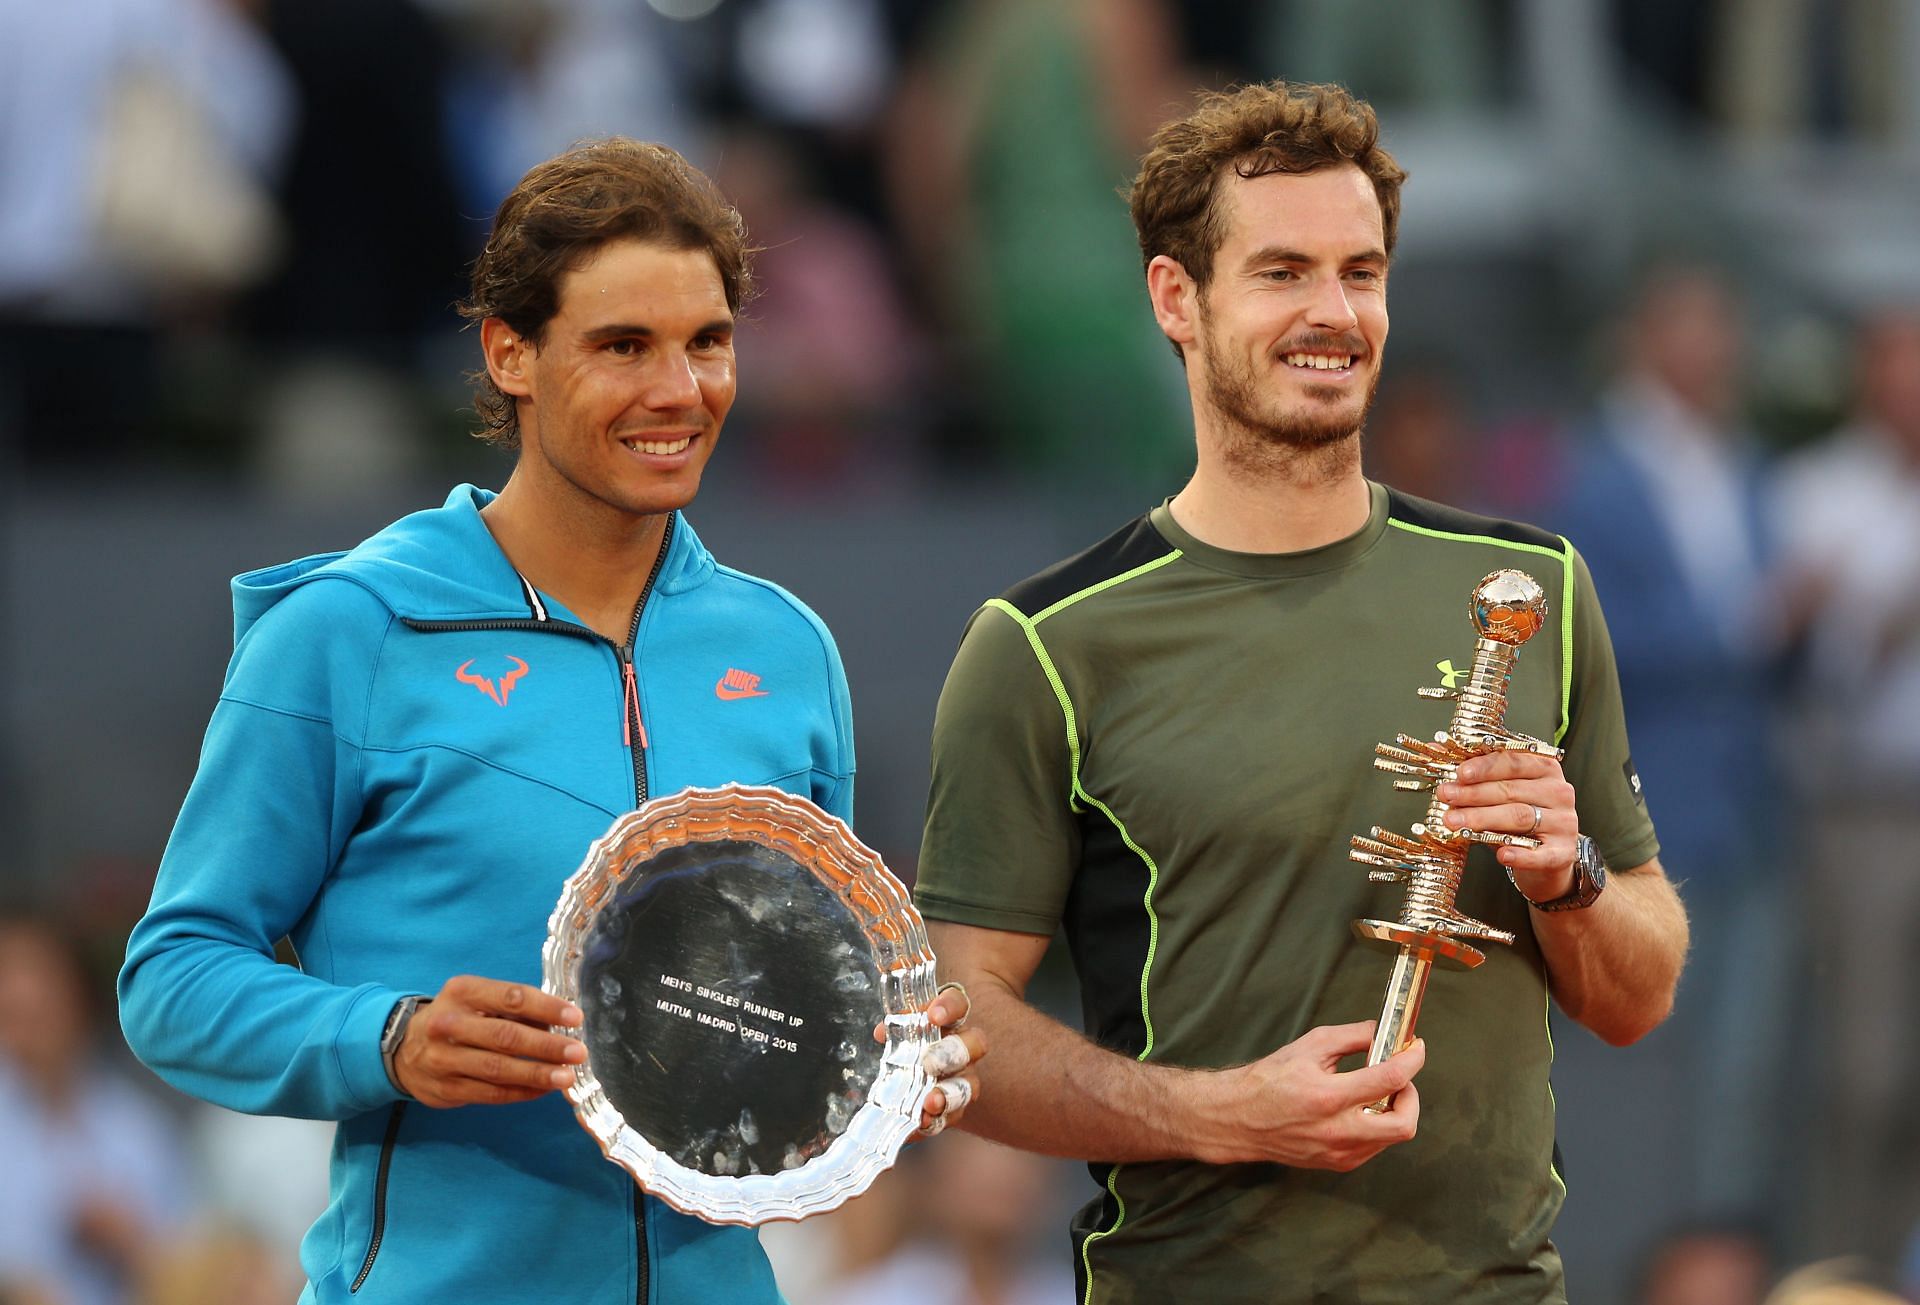 Andy Murray beat Rafael Nadal rather comprehensively in the final of the Madrid Masters back in 2015.